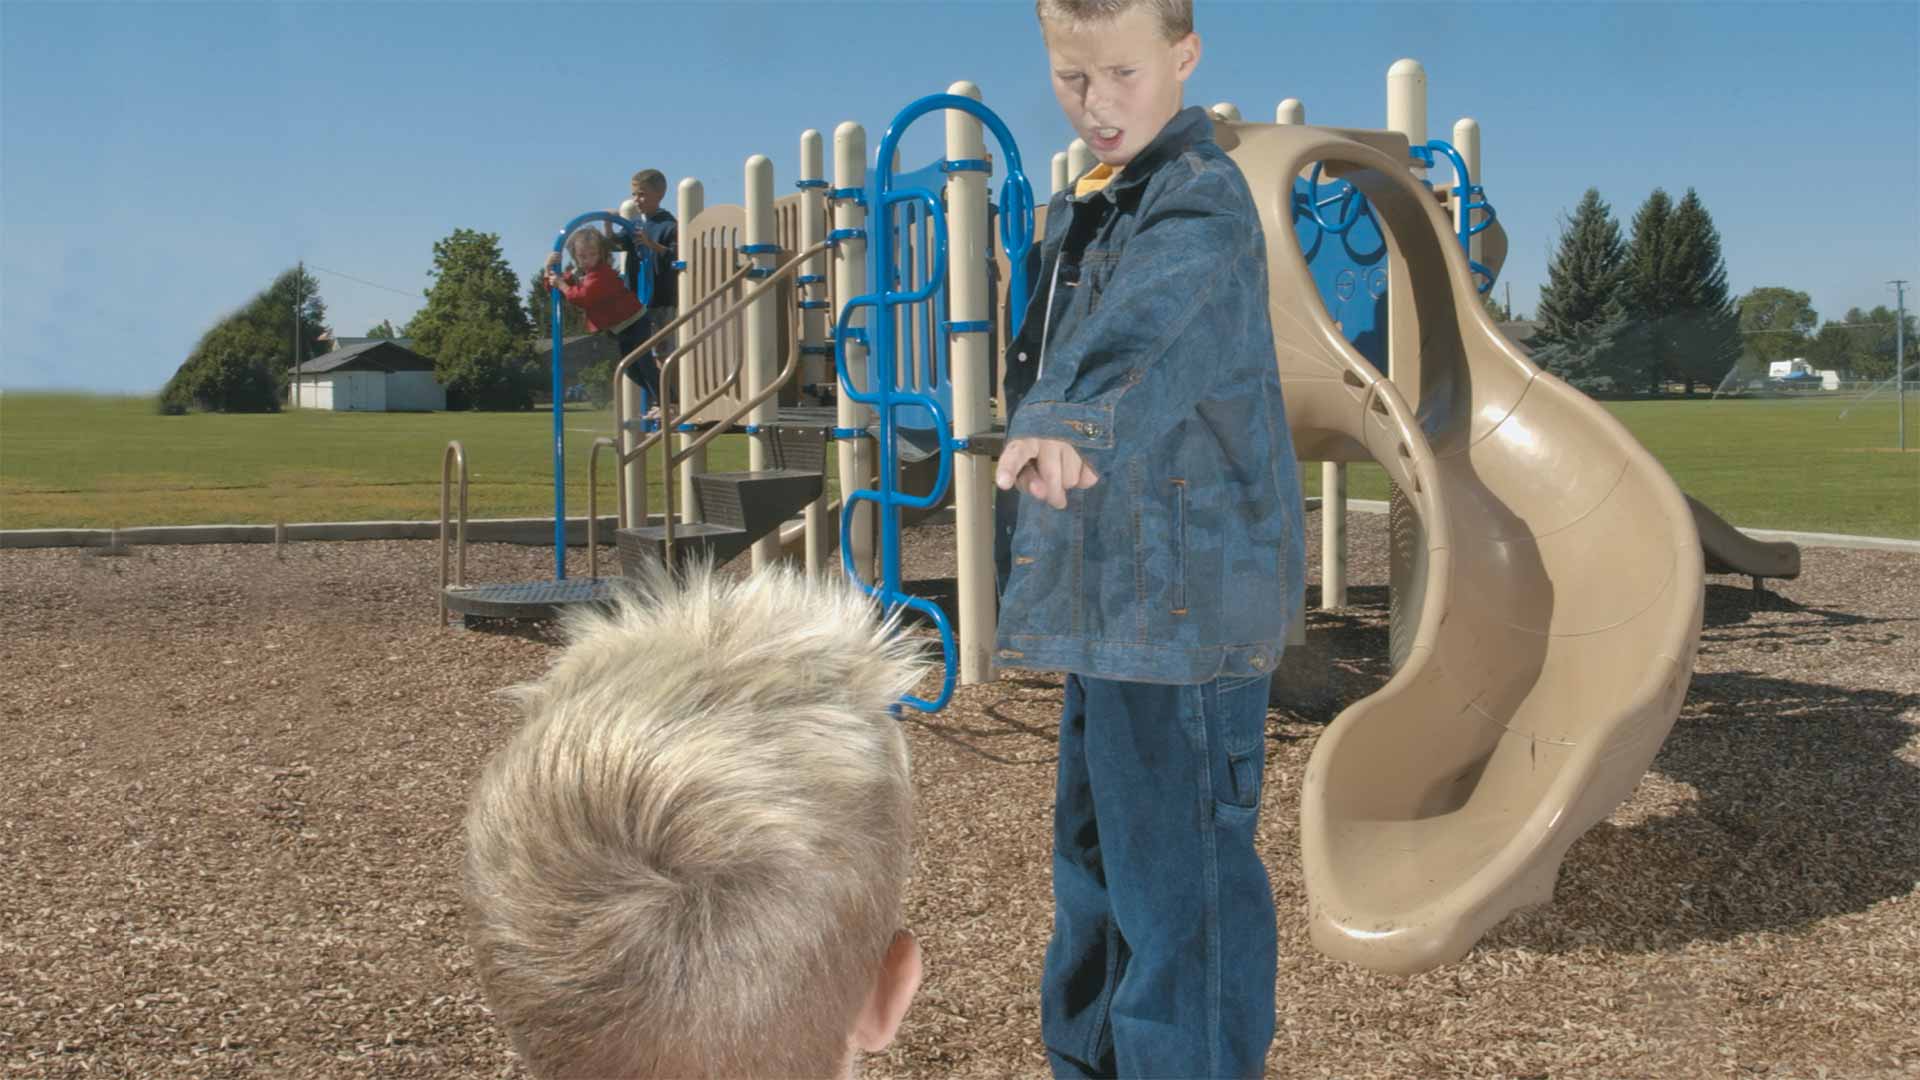 Take a Stand - Preventing bullying, interpersonal conflict and violence on the playground